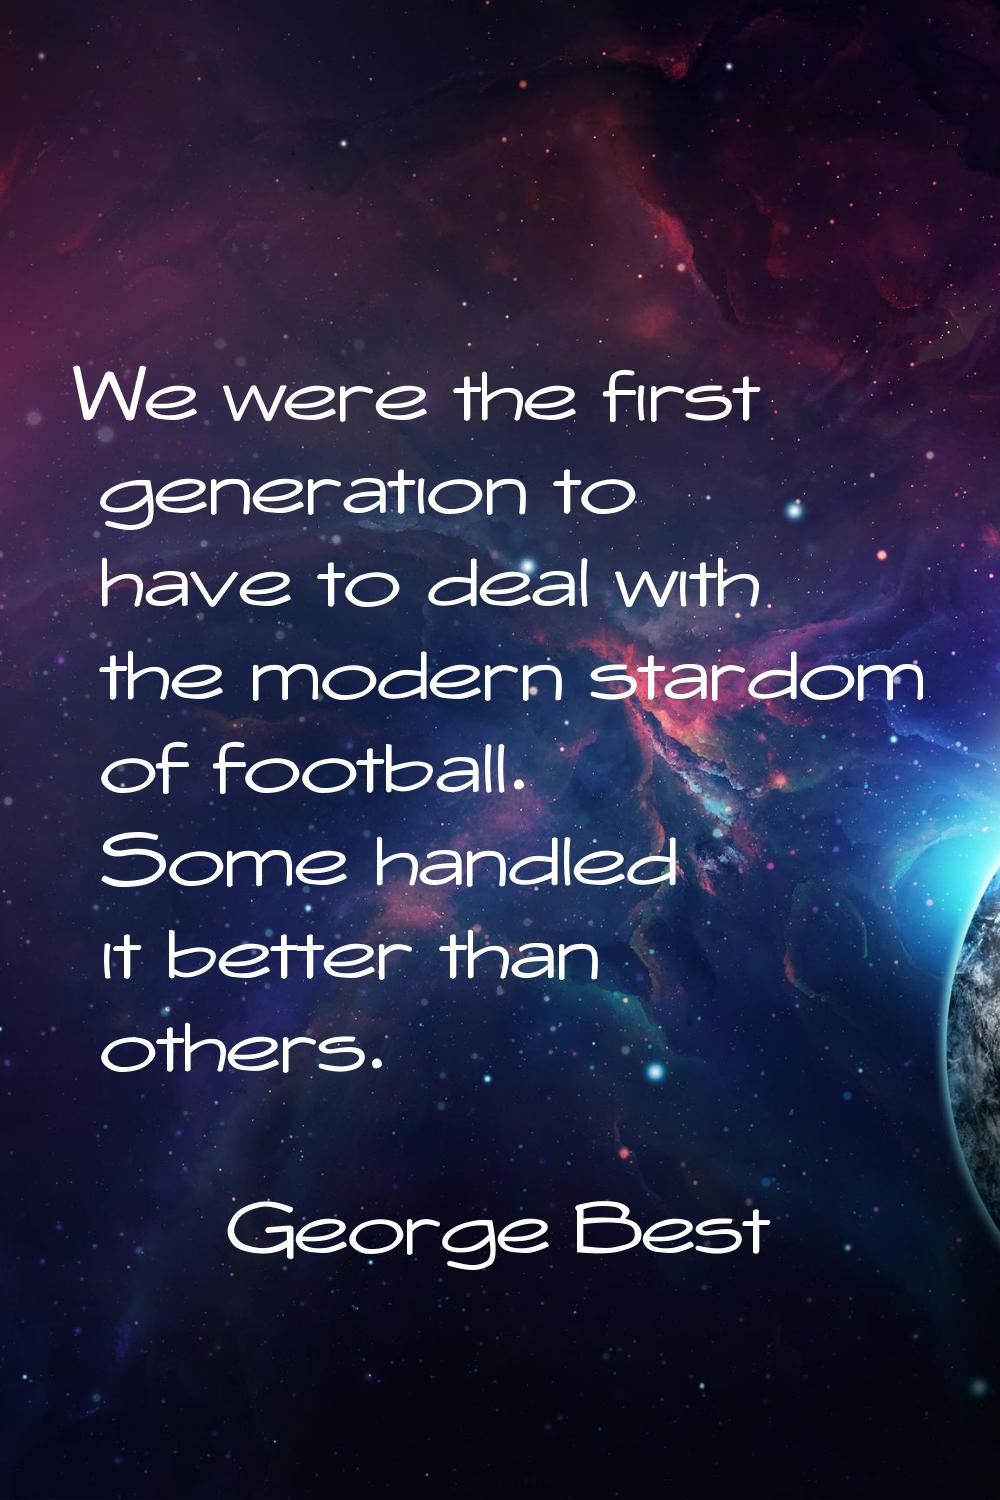 We were the first generation to have to deal with the modern stardom of football. Some handled it b